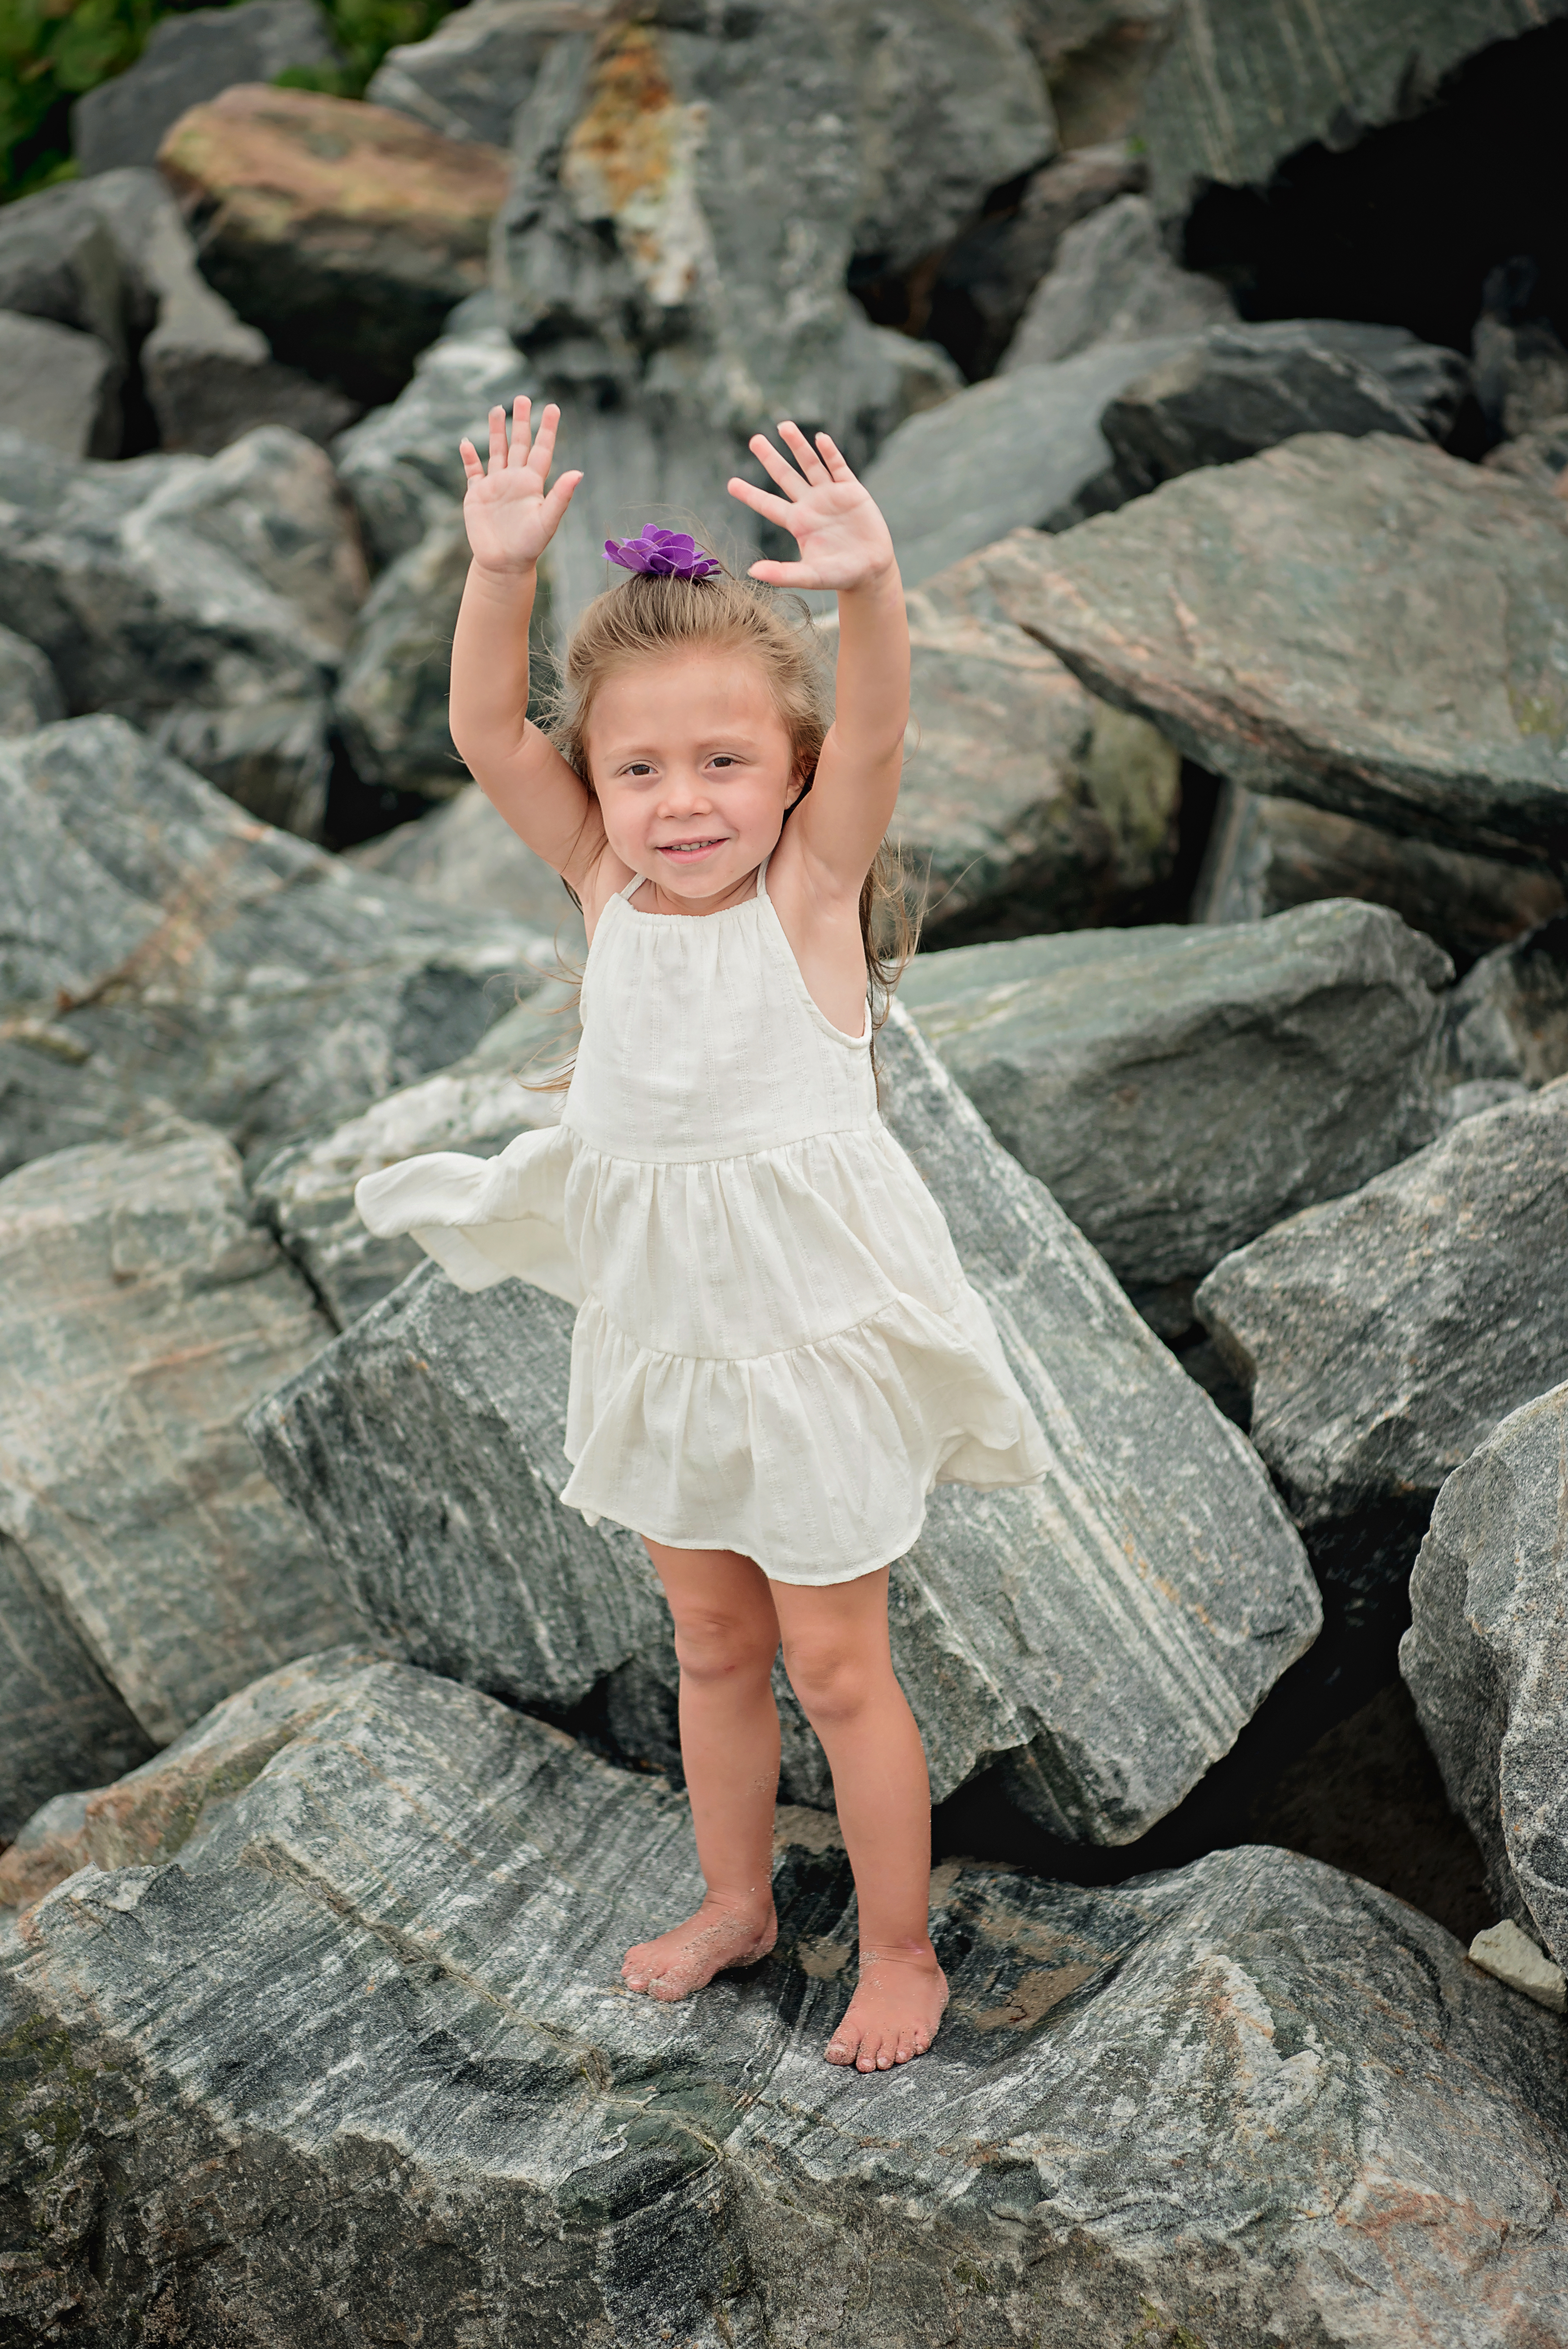 A little girl standing on some rocks with her hands up